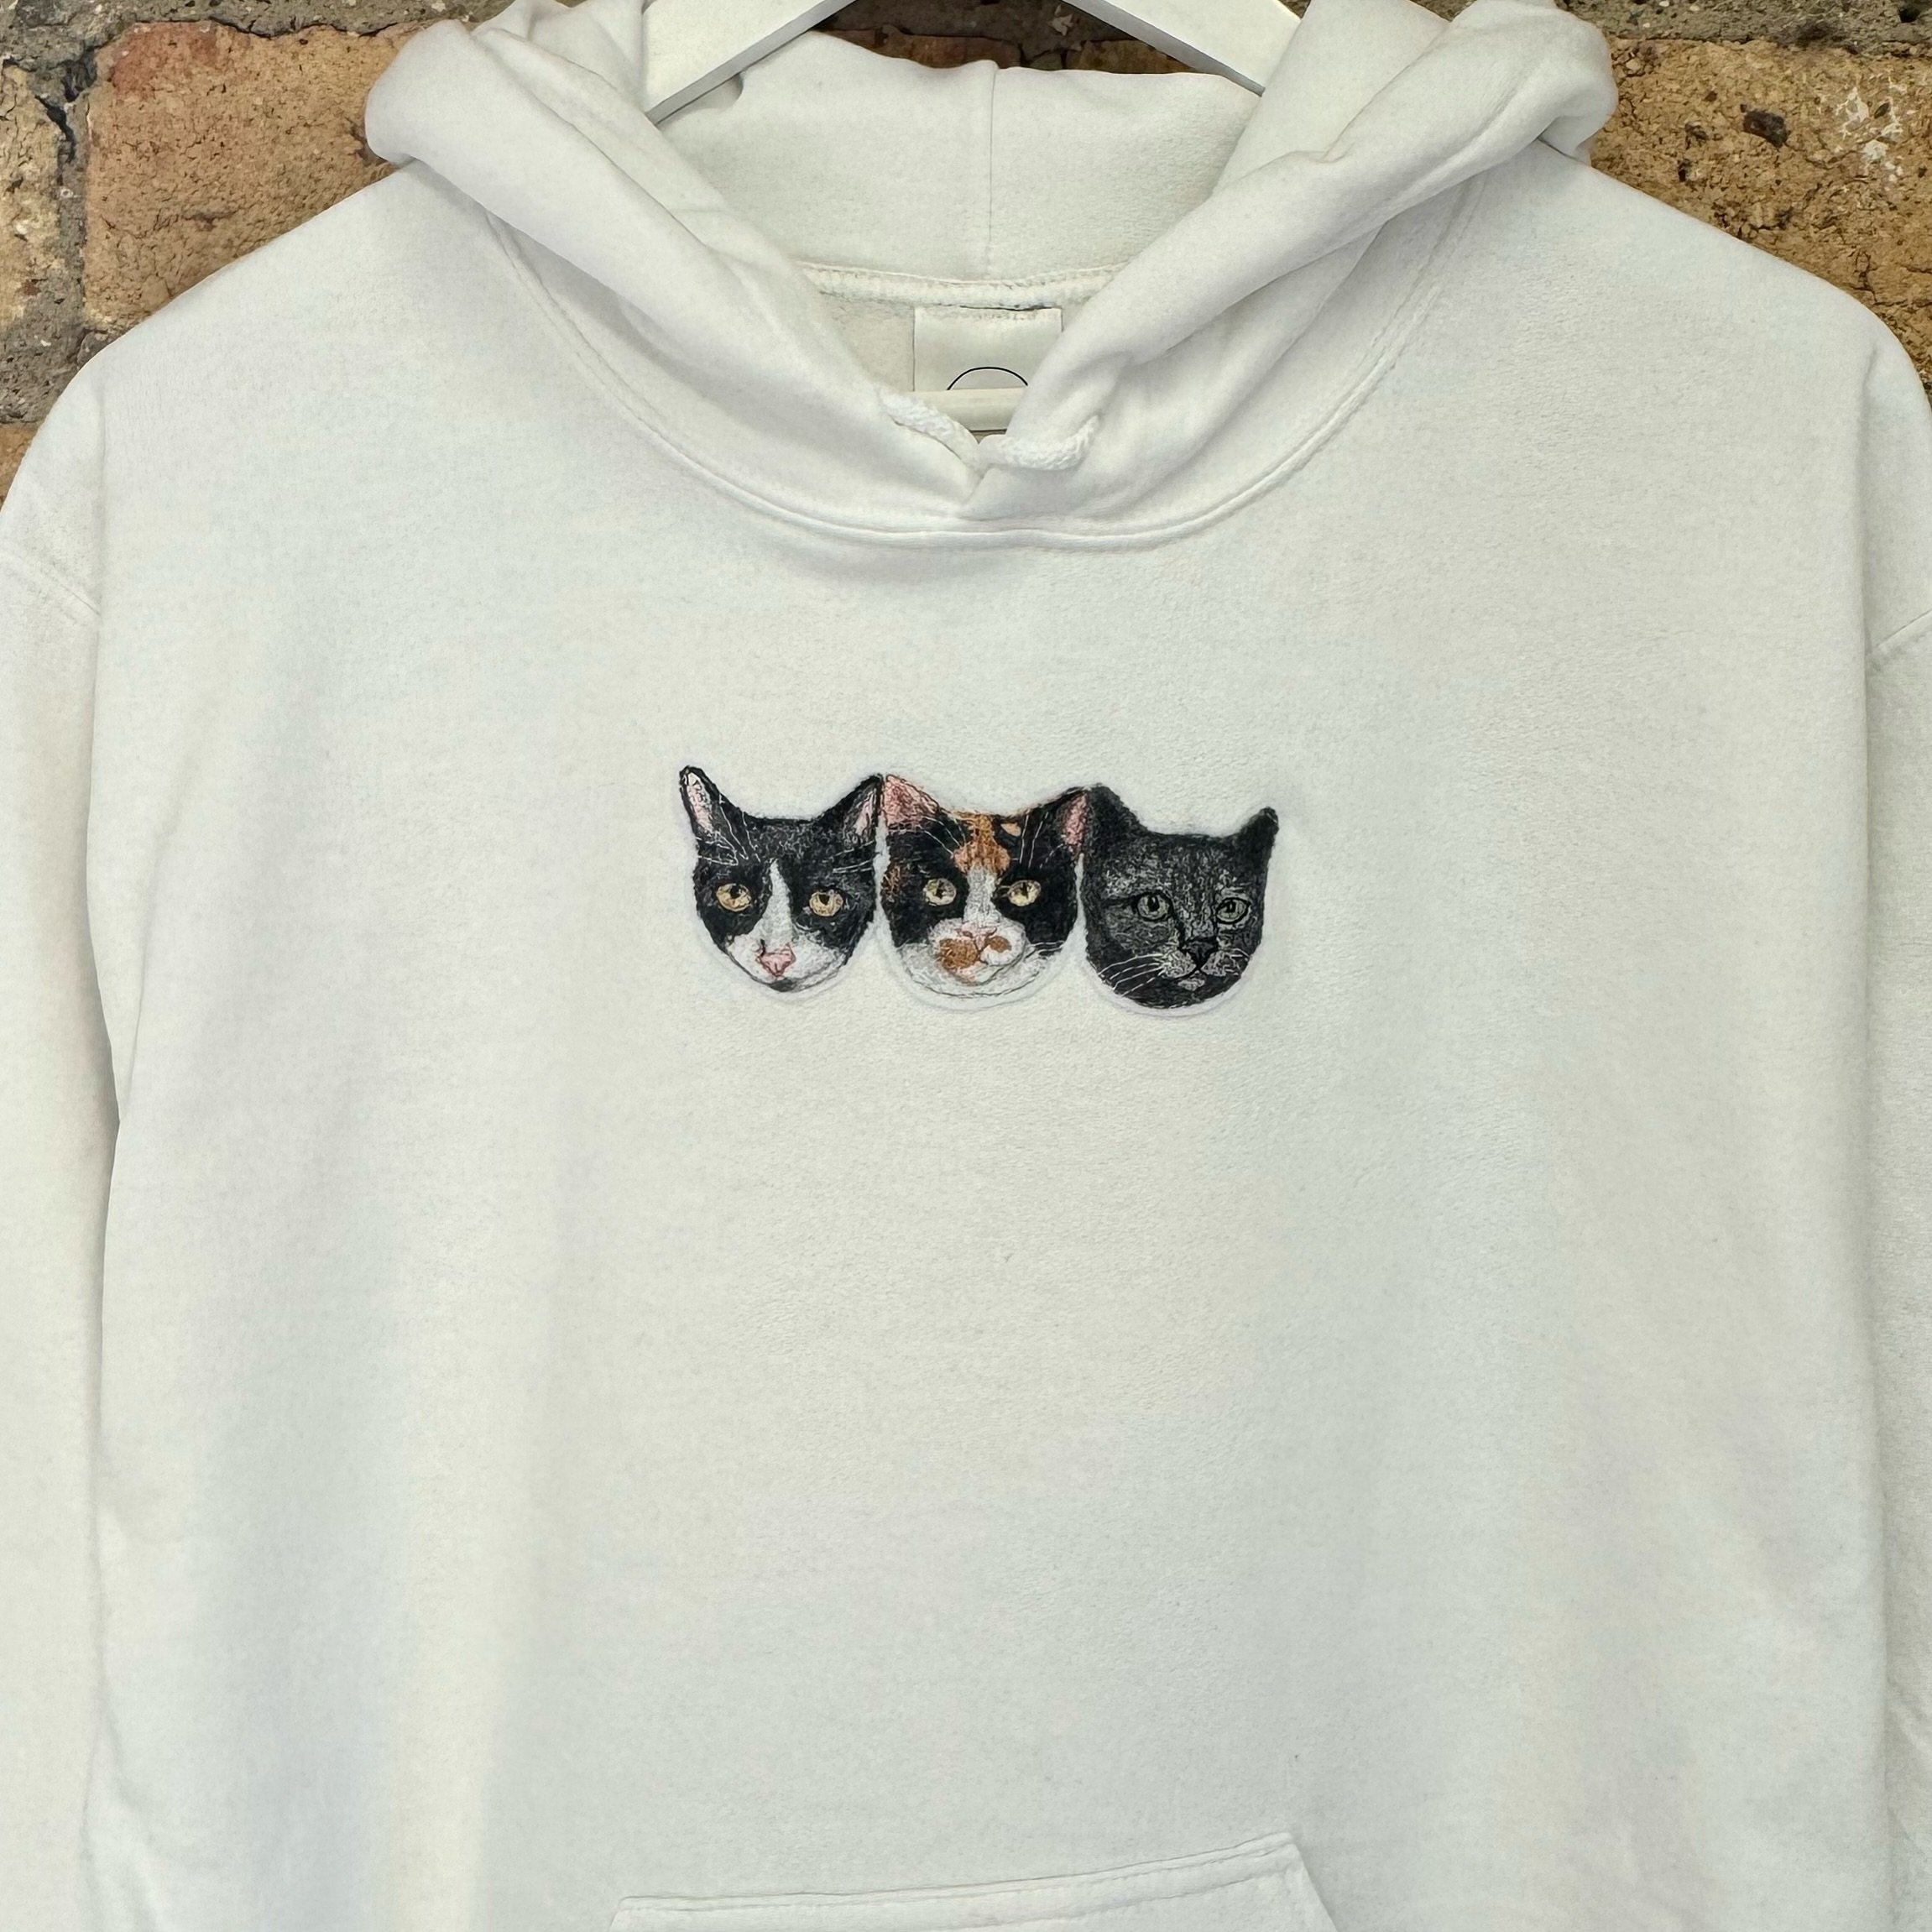 🐈&zwj;⬛🐈🐈&zwj;⬛

What a week! I&rsquo;m super excited for a weekend off because it&rsquo;s been pretty intense here at Stitched by Alan HQ! But thanks for keeping me busy!

Here is a cute little triple hoodie with three cats on, super cute and sta